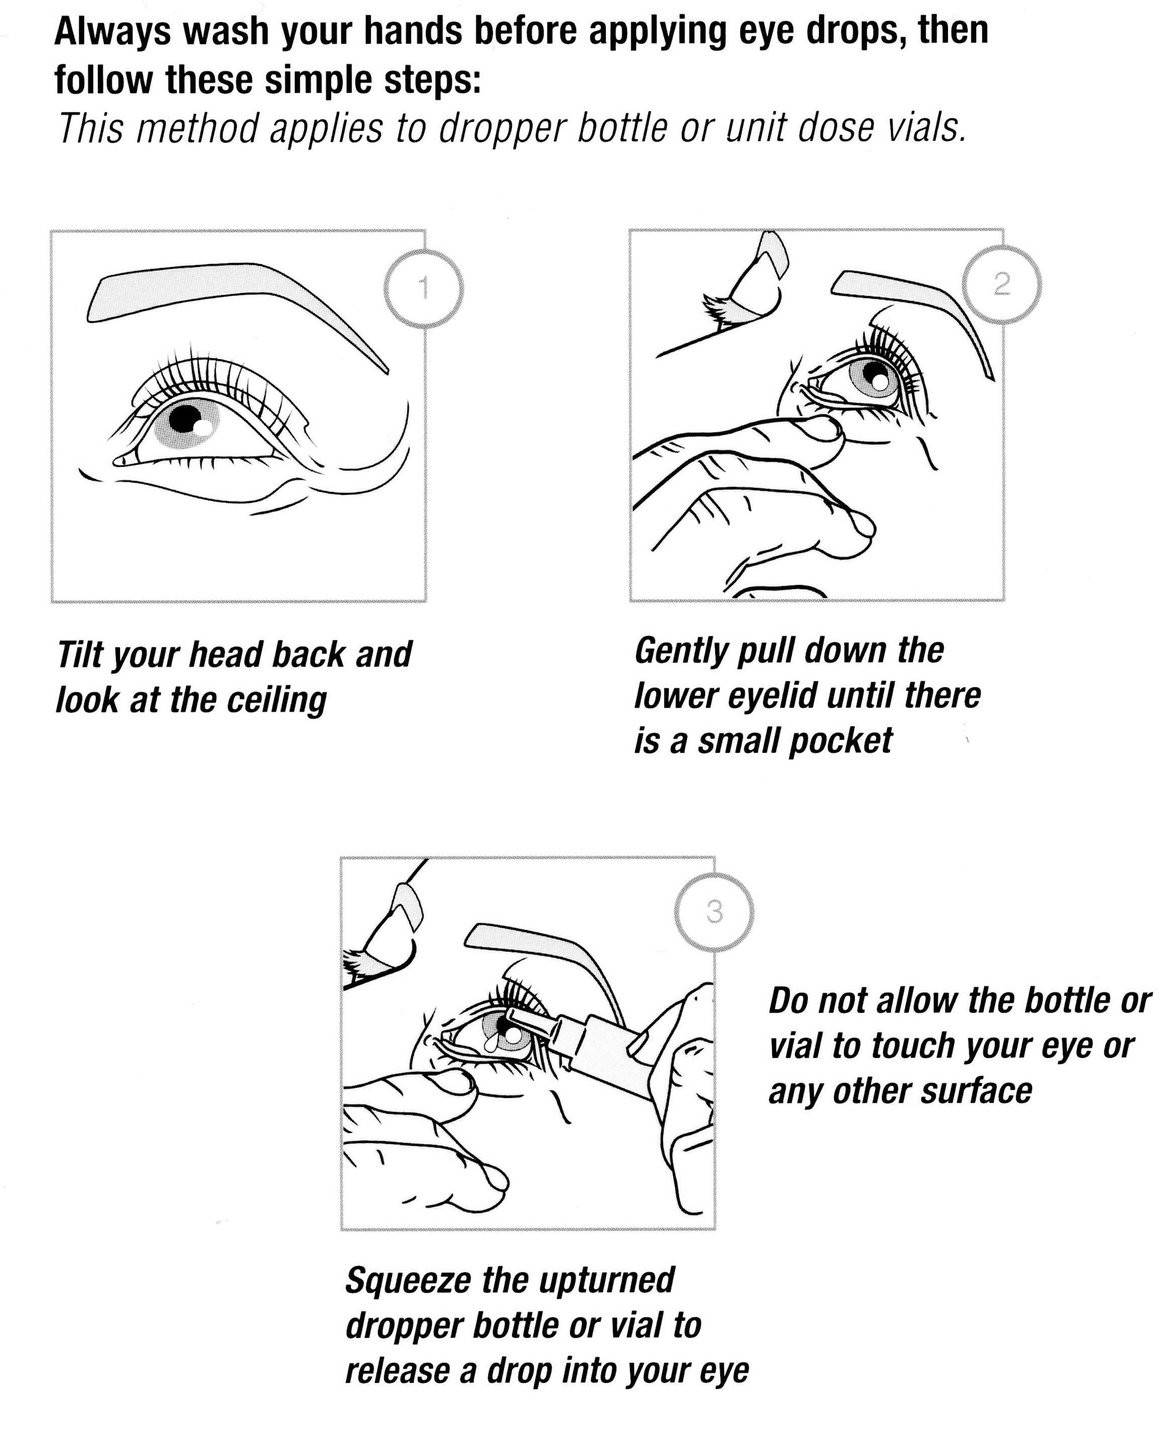 how_to_apply_eye_drops